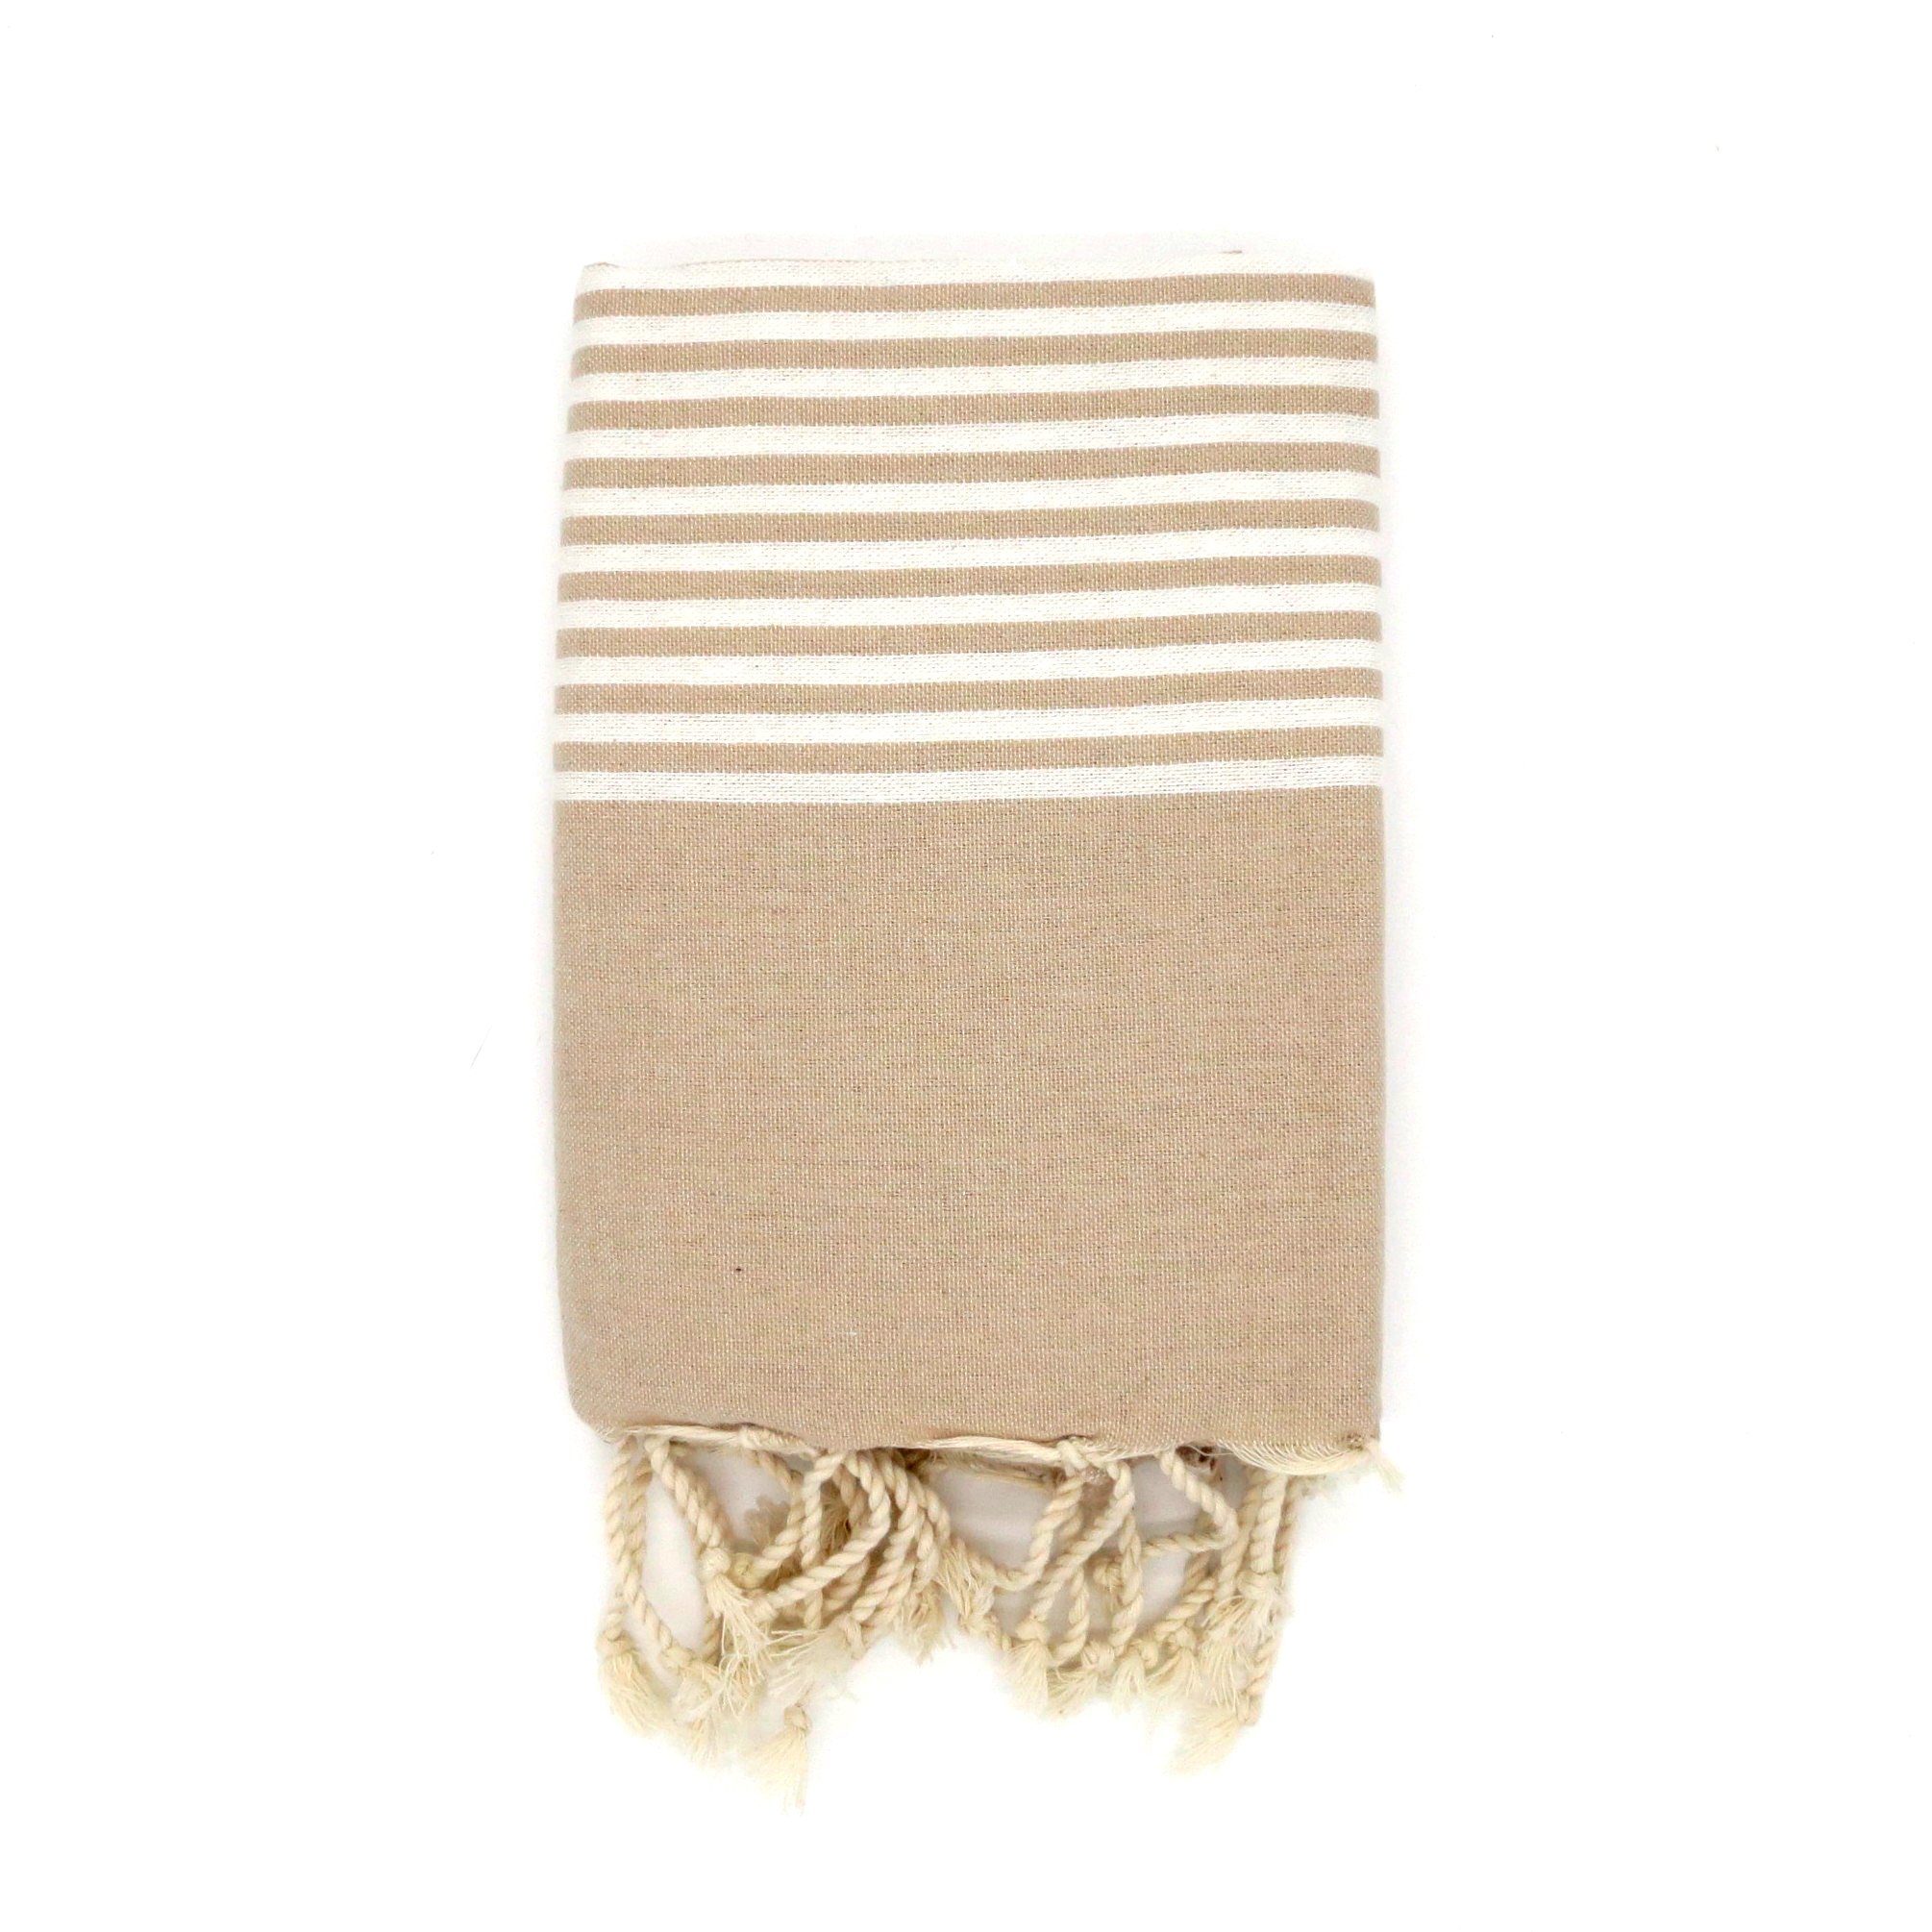 Cotonway Hamamtuch Fouta Fala, 100% recycling Baumwolle Sand